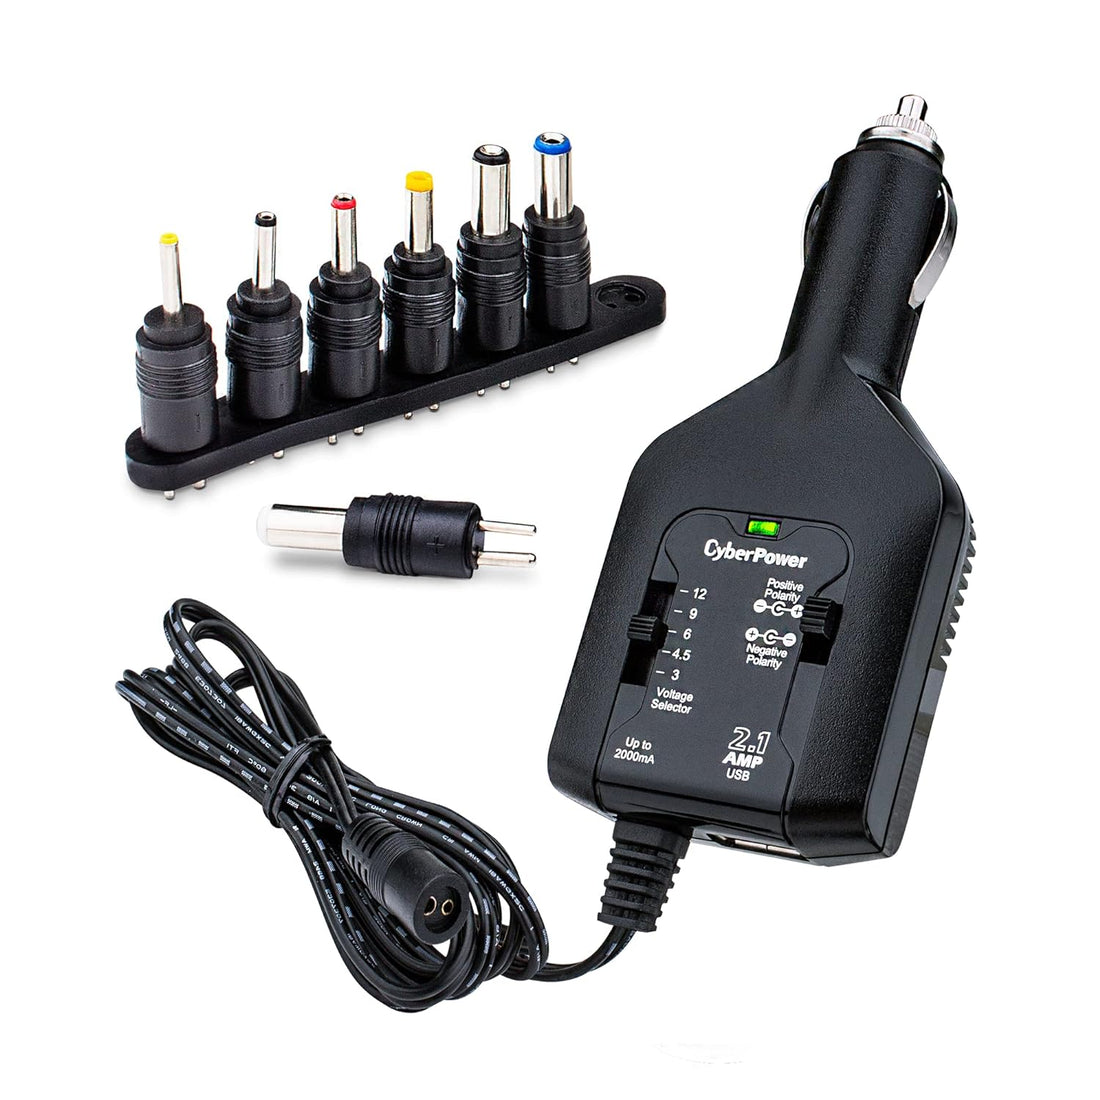 CyberPower CPUDC1U2000 3-12V 2000mAh DC Universal Power Adapter with 2.1A USB Charging Port